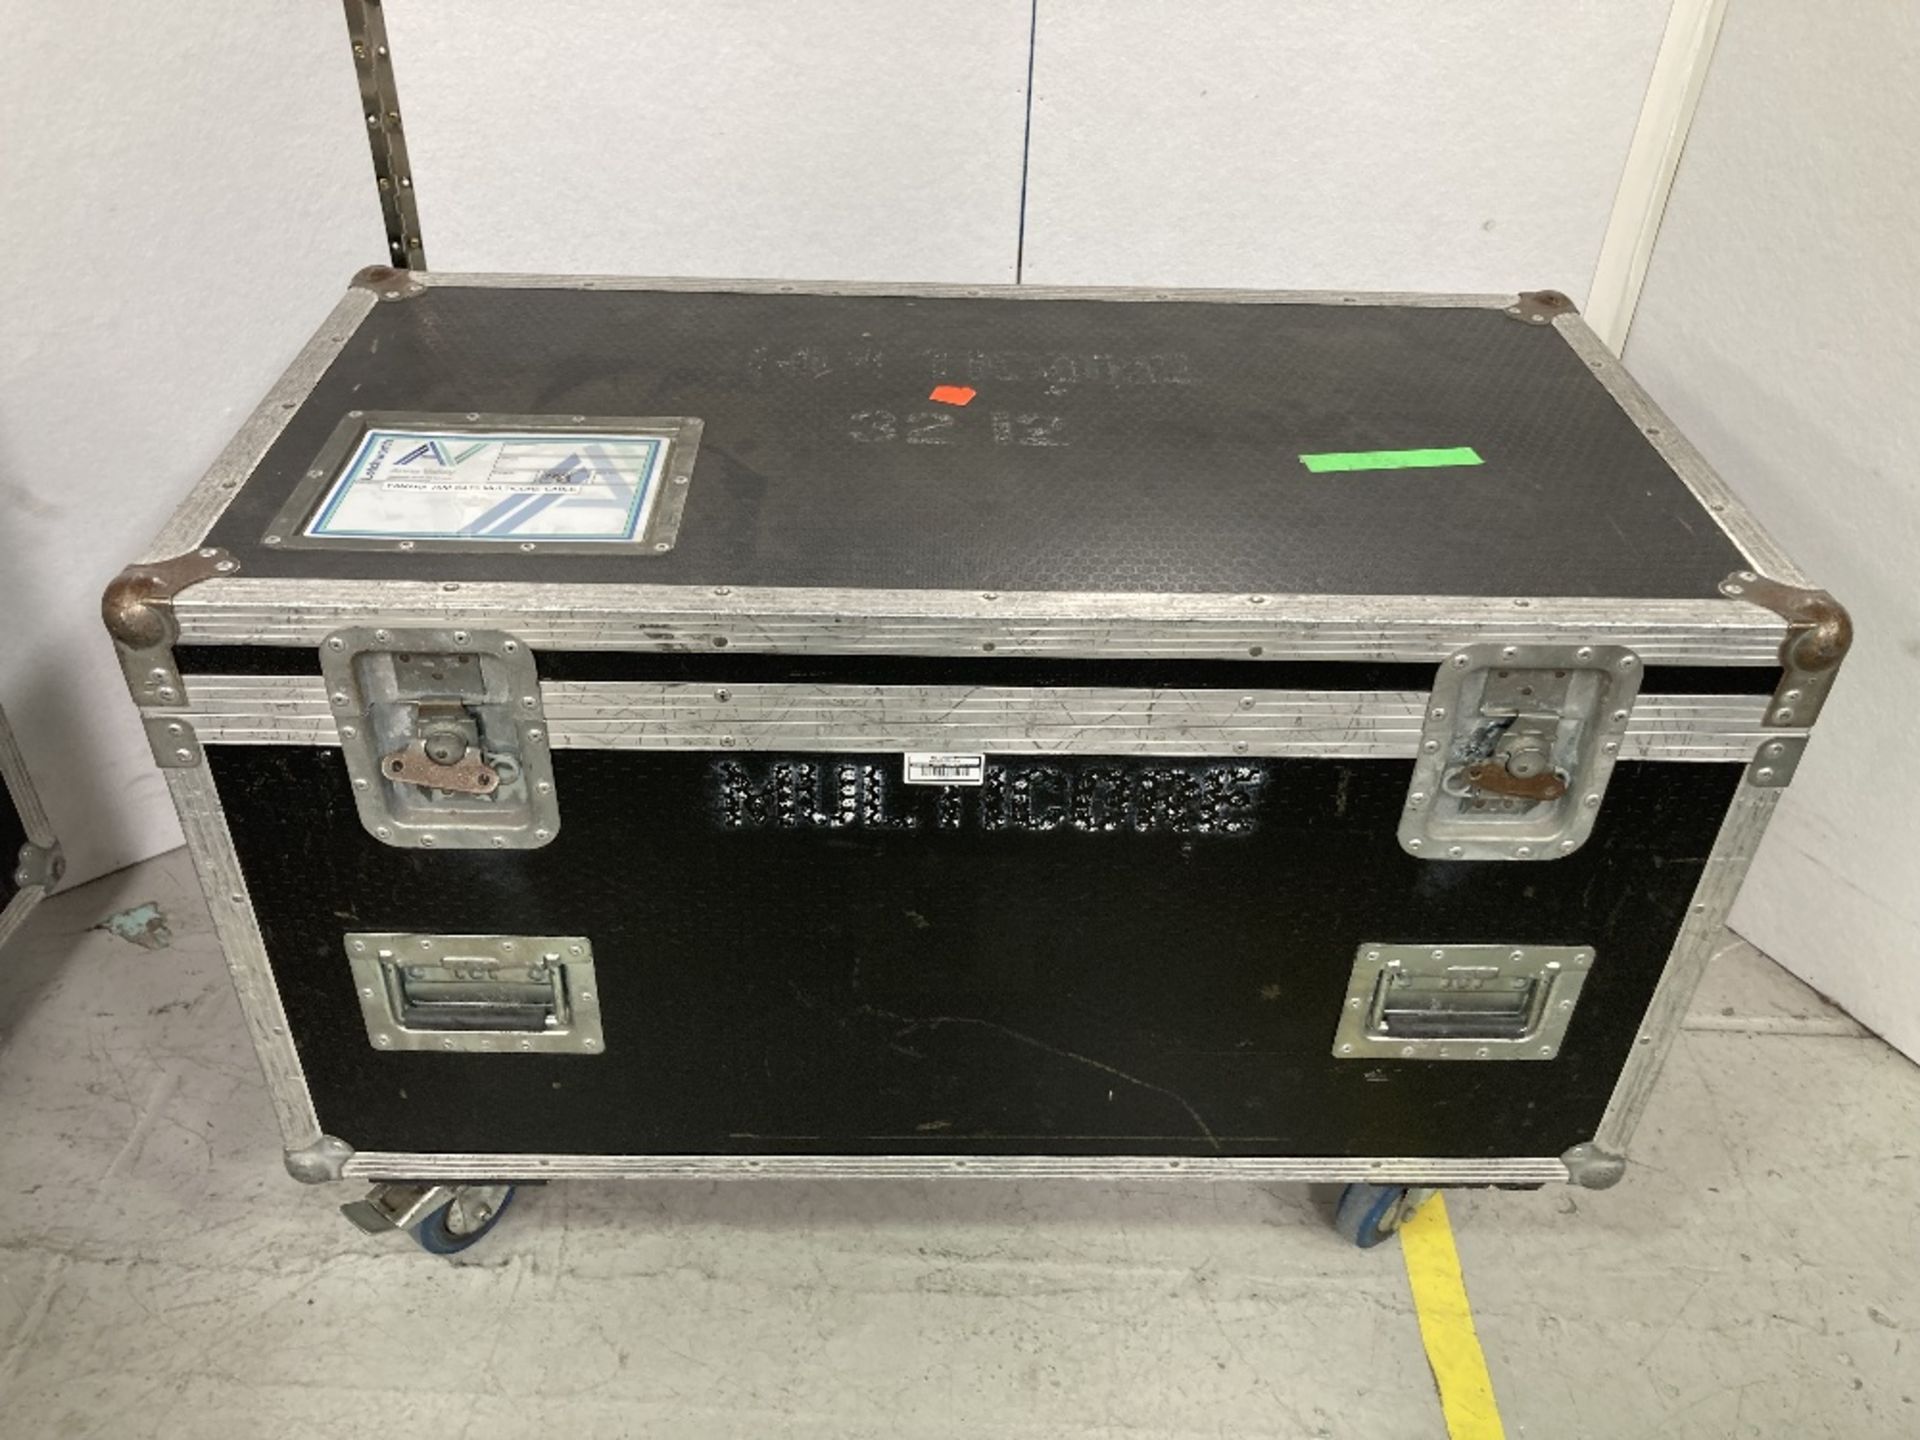 Yamaha 75mtr CAT 5 Multicore Cable & Heavy Duty Mobile Flight Case - Image 4 of 4